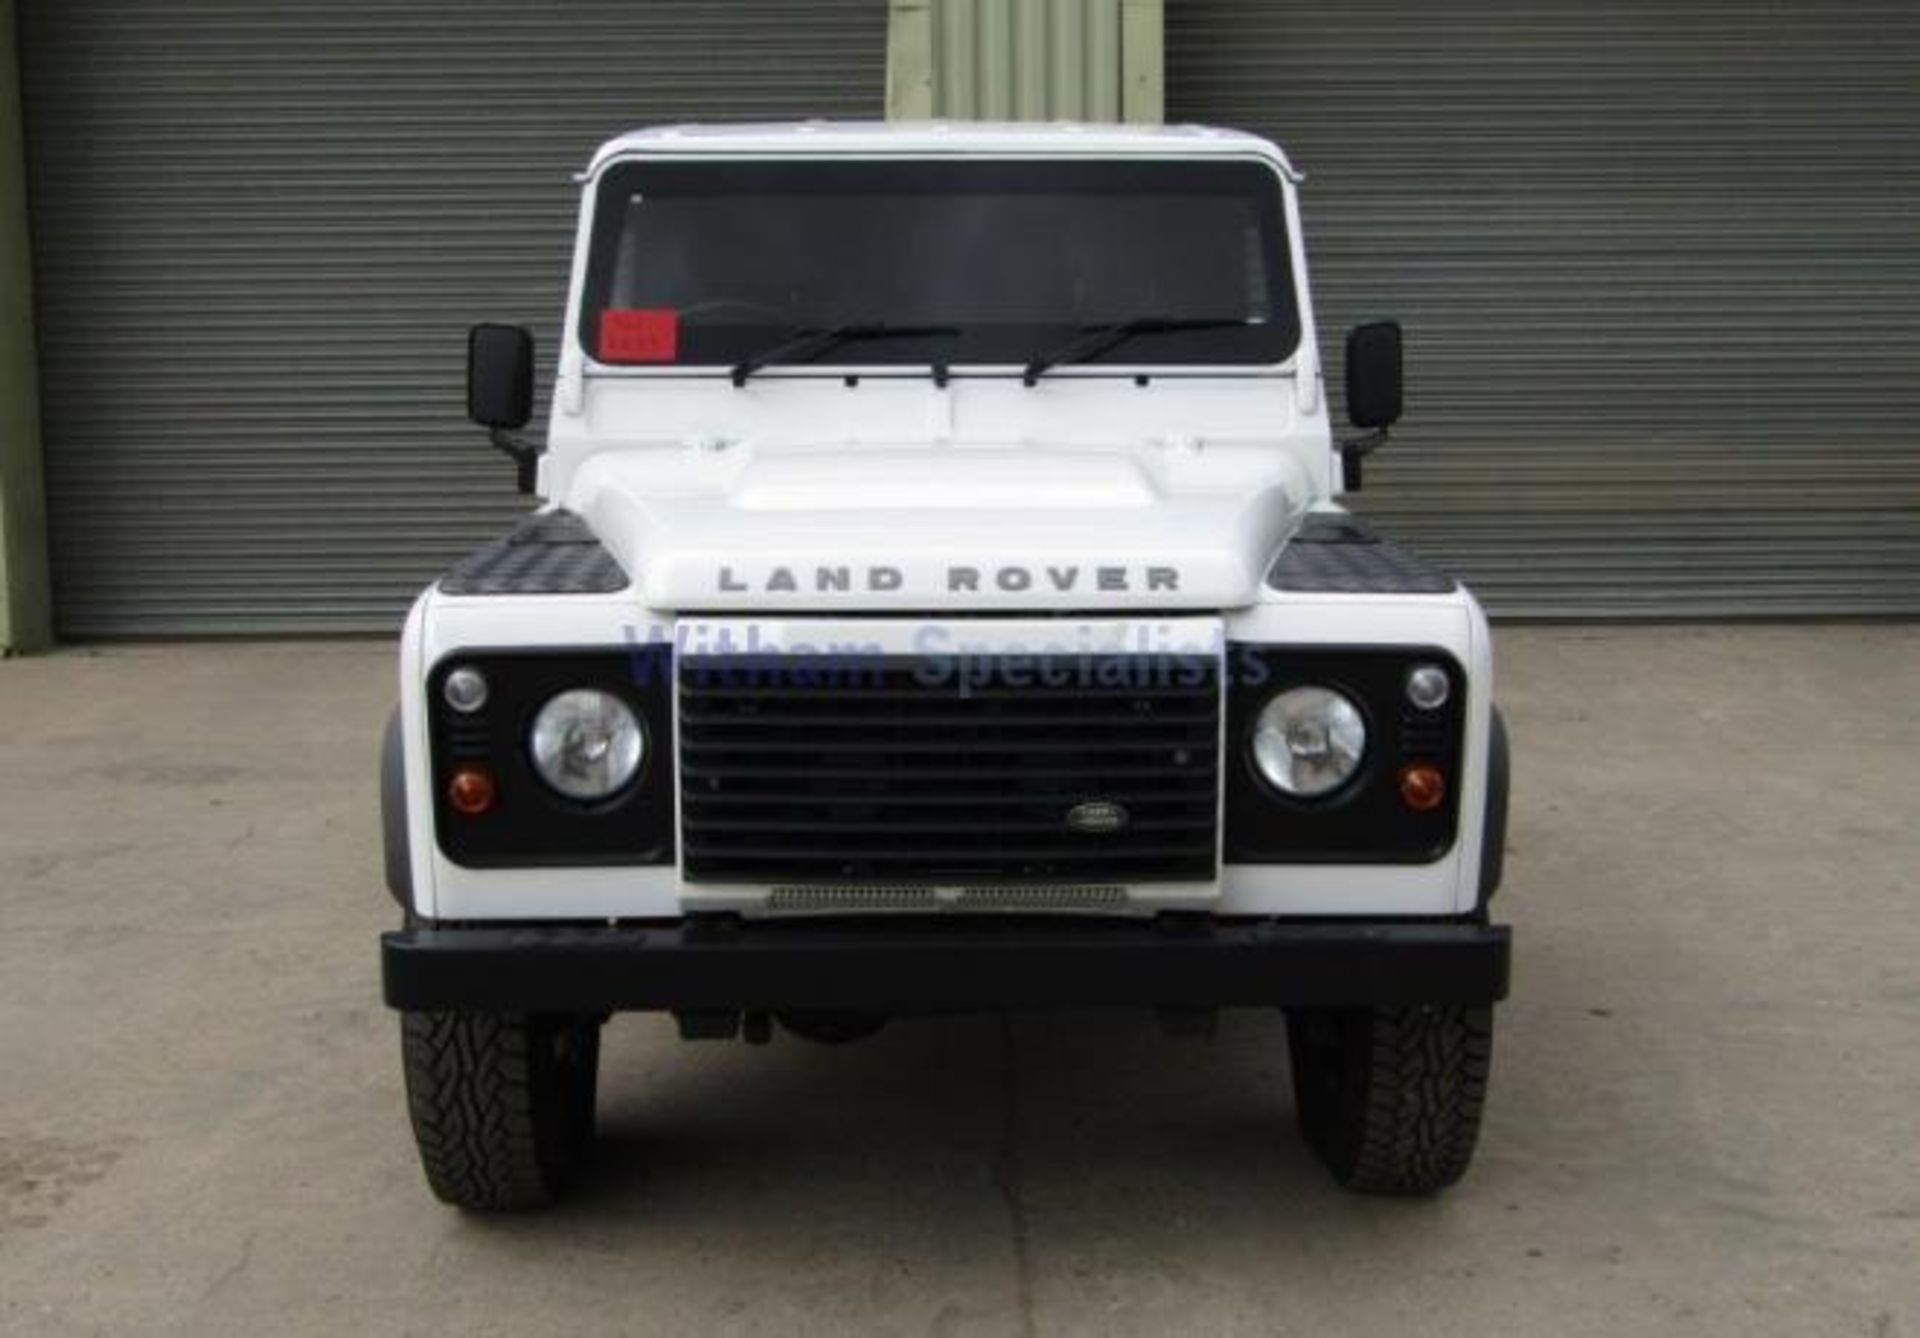 New Unused Export Specification Land Rover Defender Armoured 130 Chassis Cab - Image 2 of 19